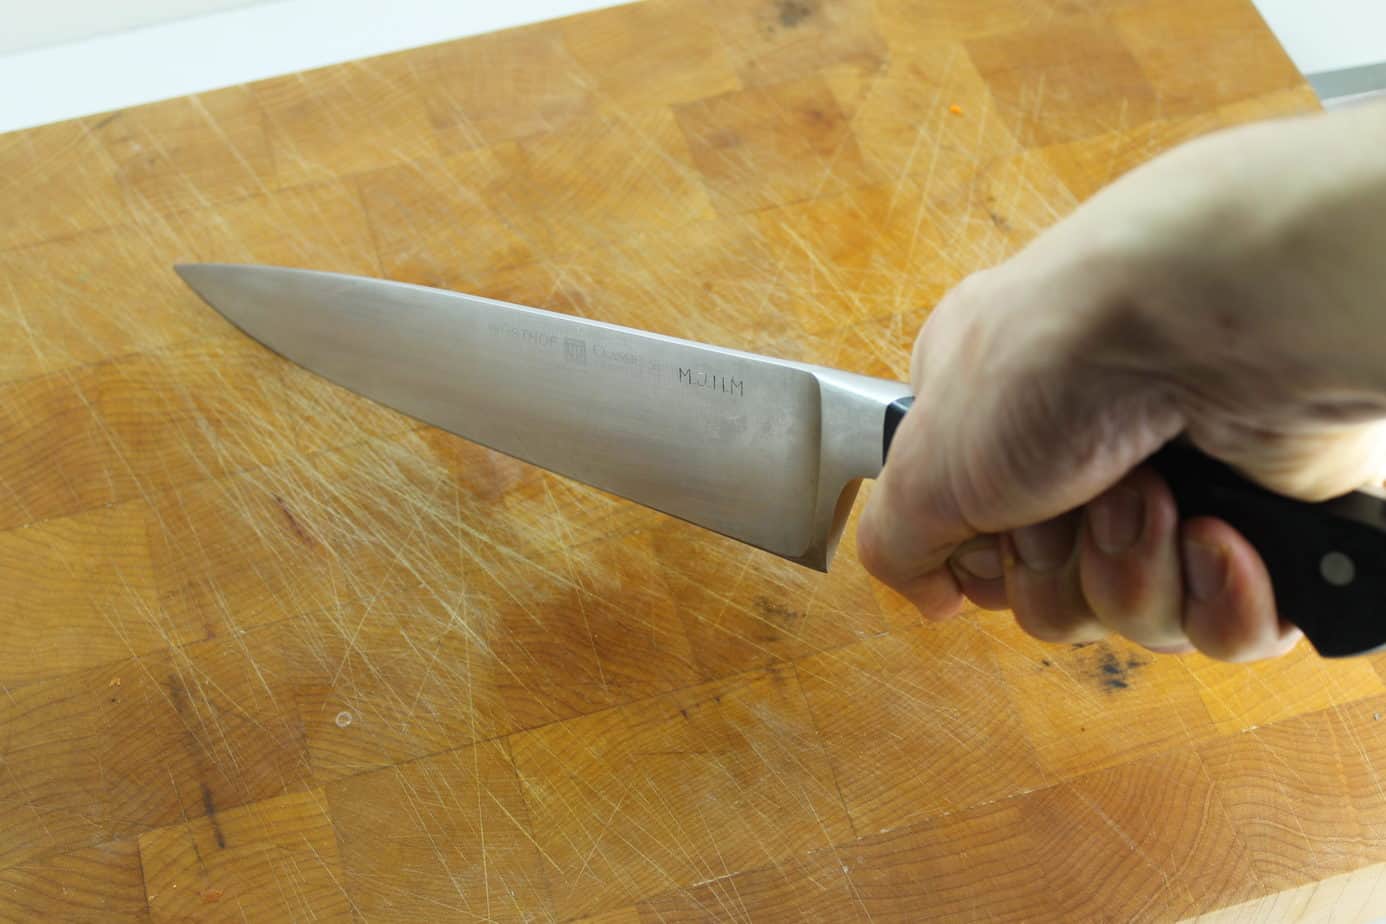 Don't hold the knife by the handle like this. The hold does not give you alot of control over the knife and the weigth of the blade is off center.